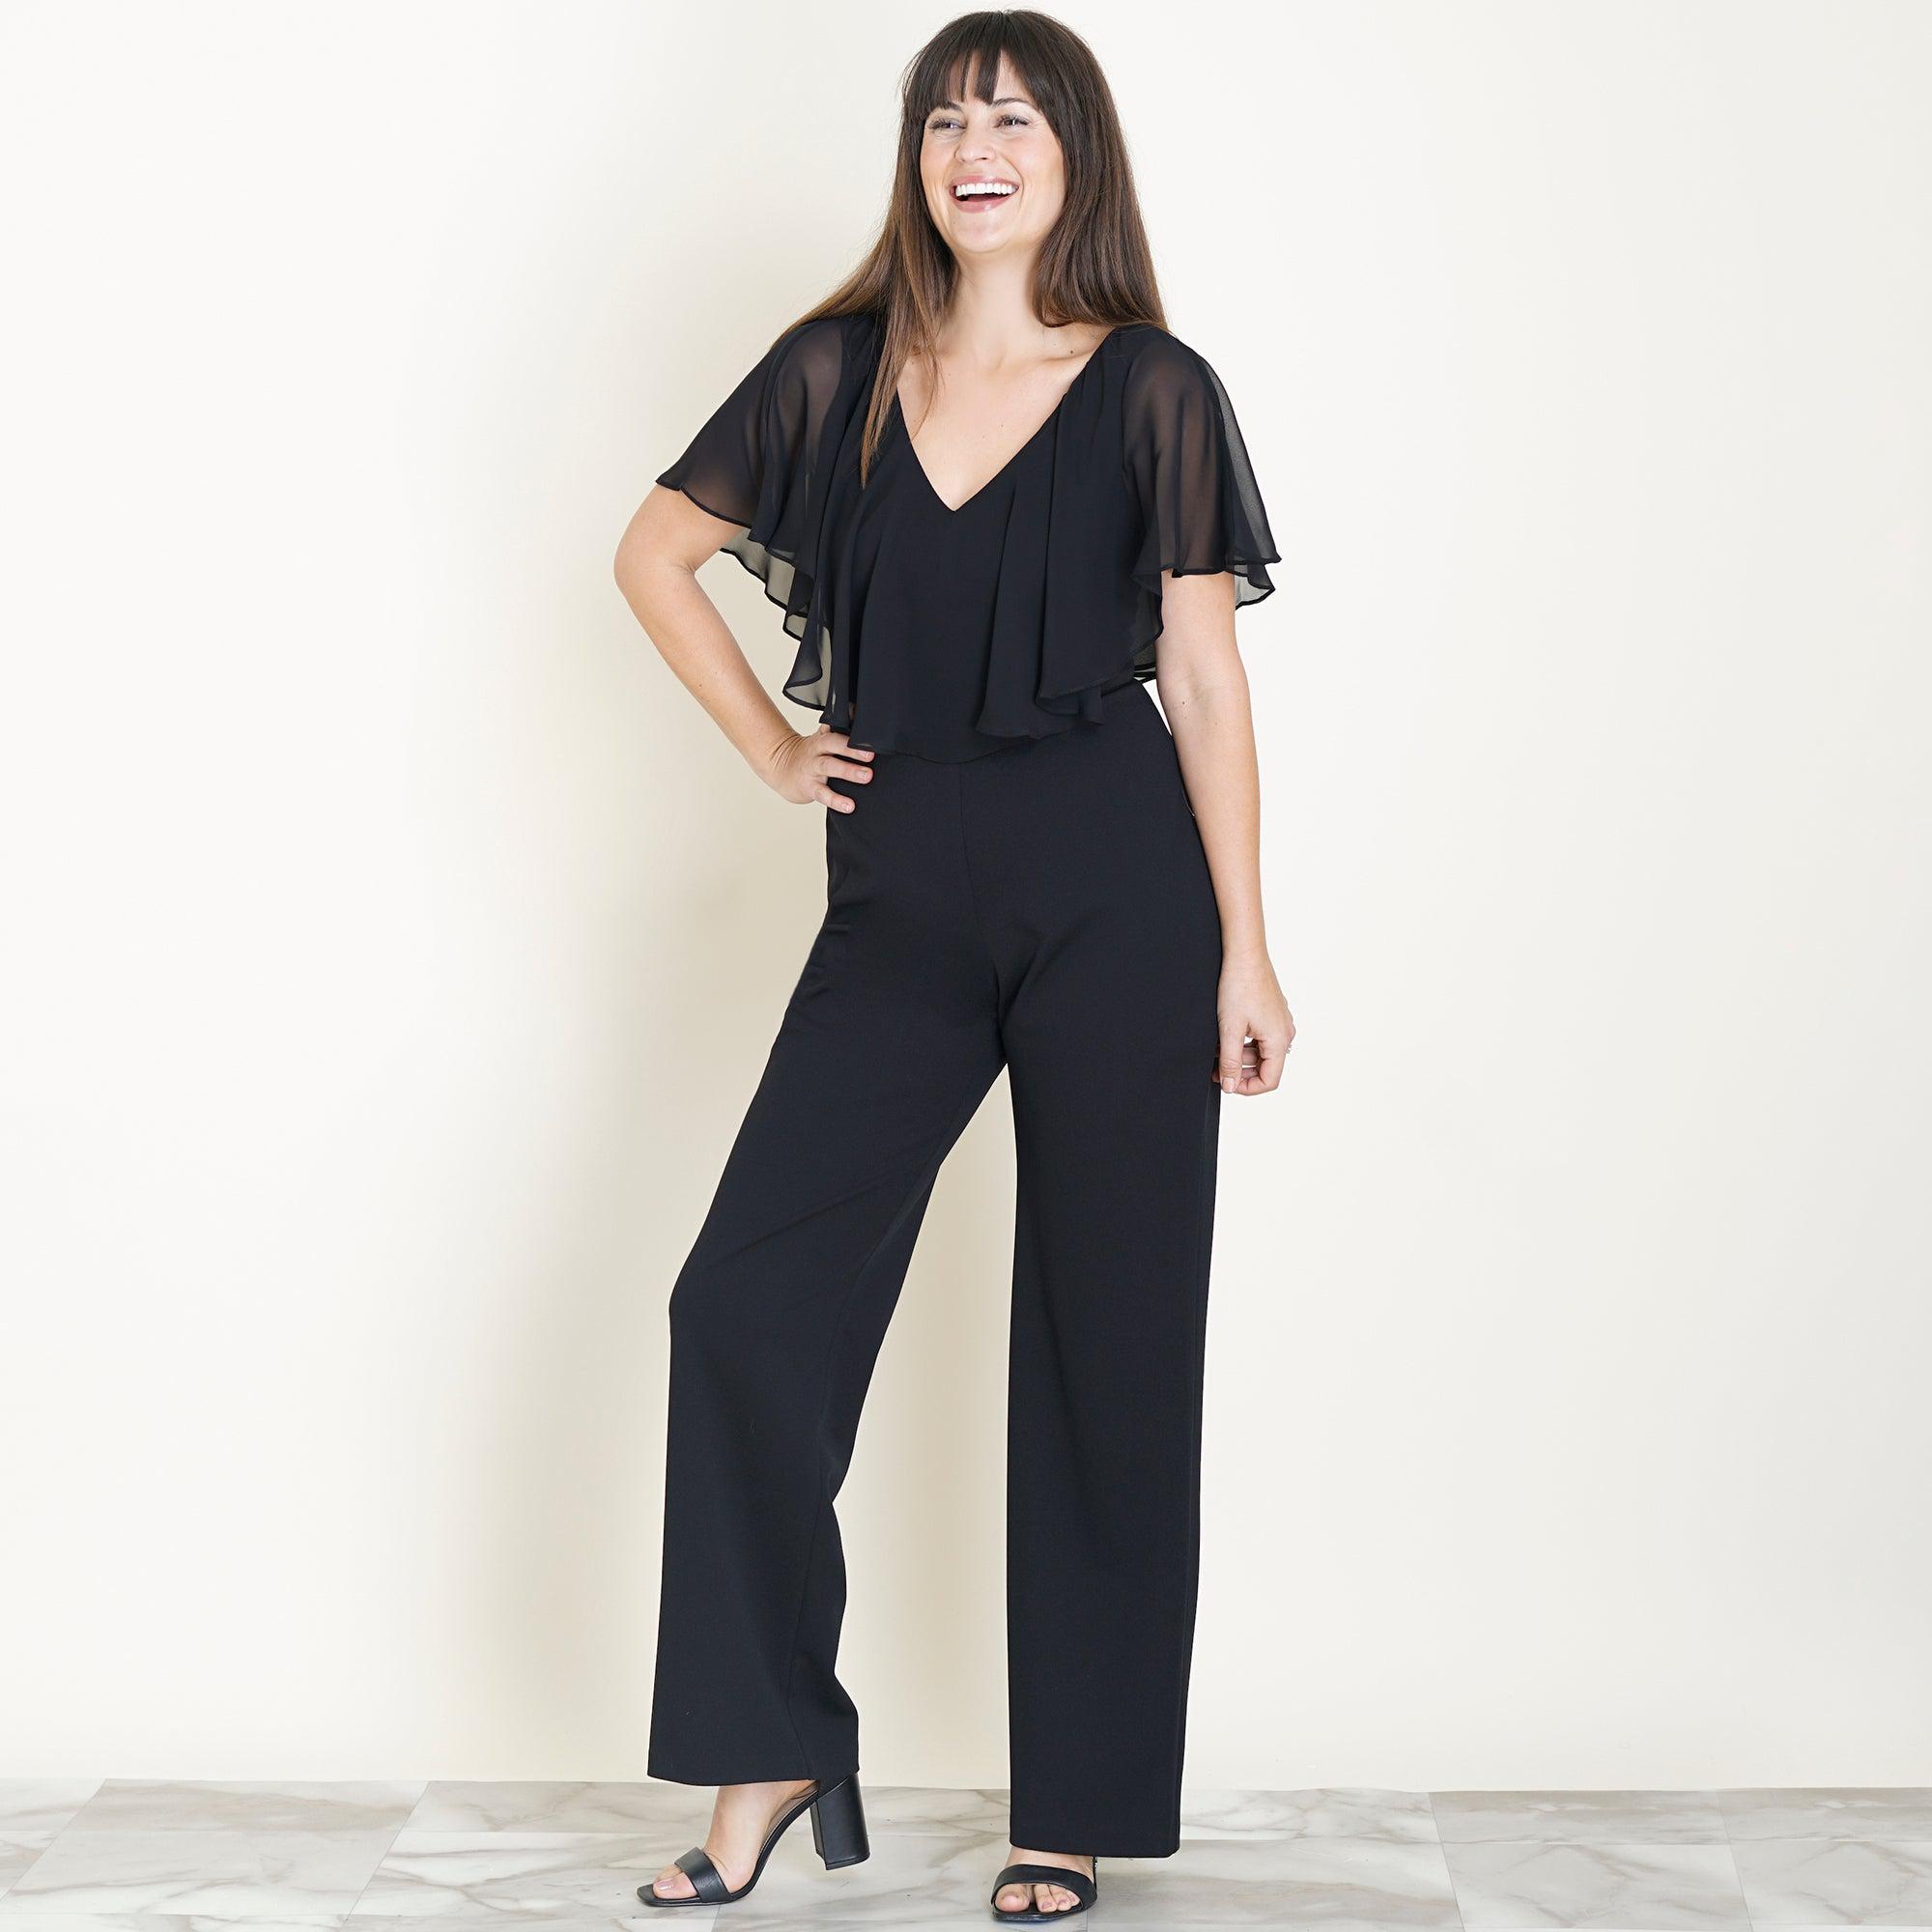 Woman posing wearing Black Sunny 2.0 Jumpsuit from Connected Apparel